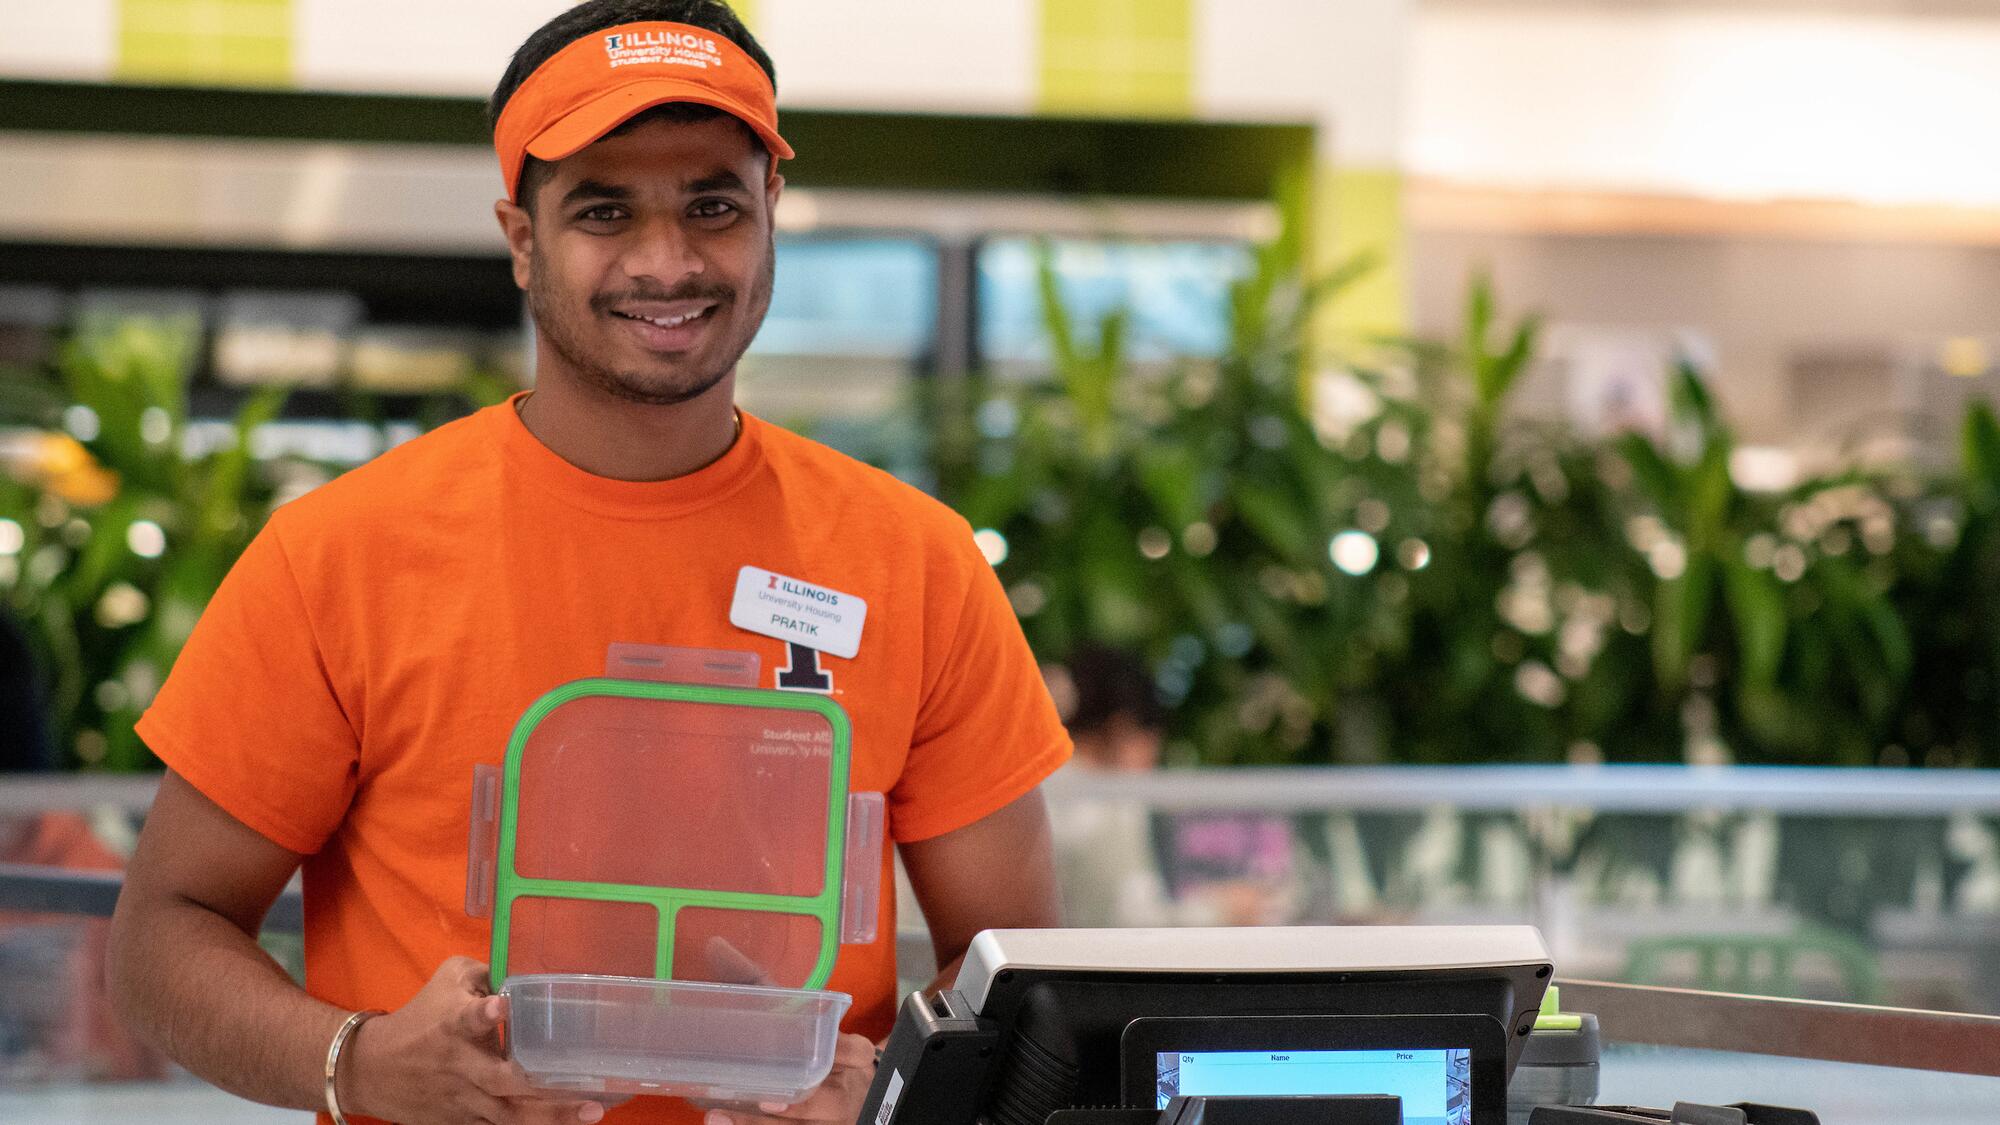 A University Housing employee smiles as he holds and displays a Good2Go container at a dining hall.